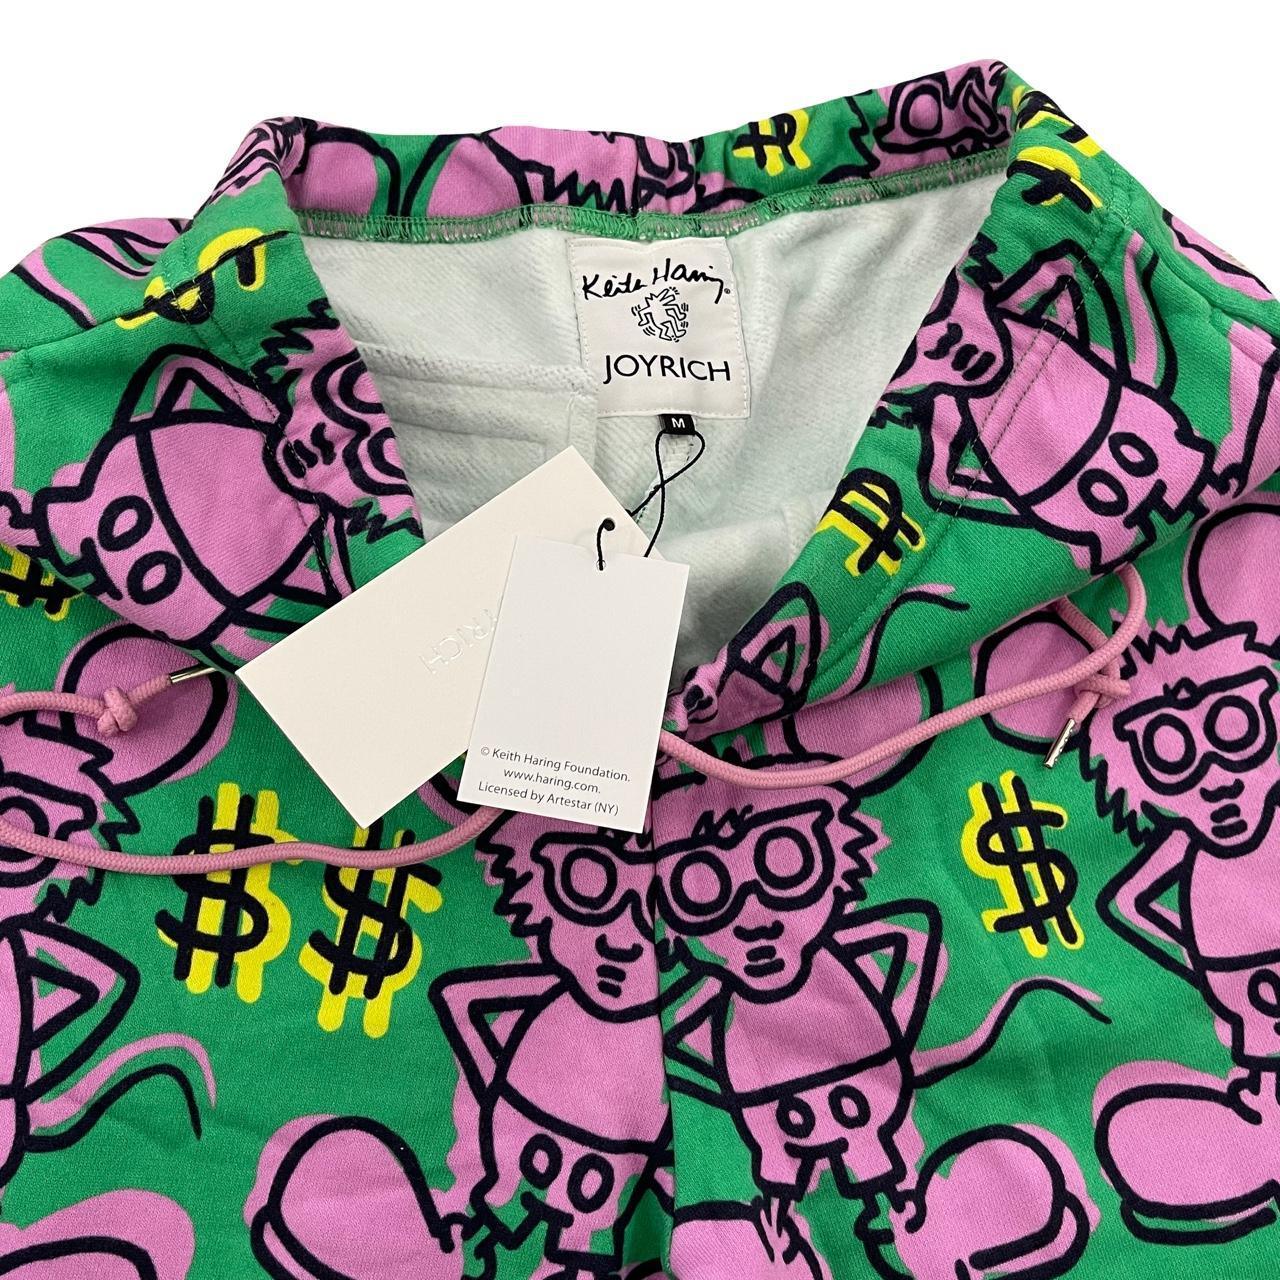 JOYRICH x Keith Haring Joggers - Known Source